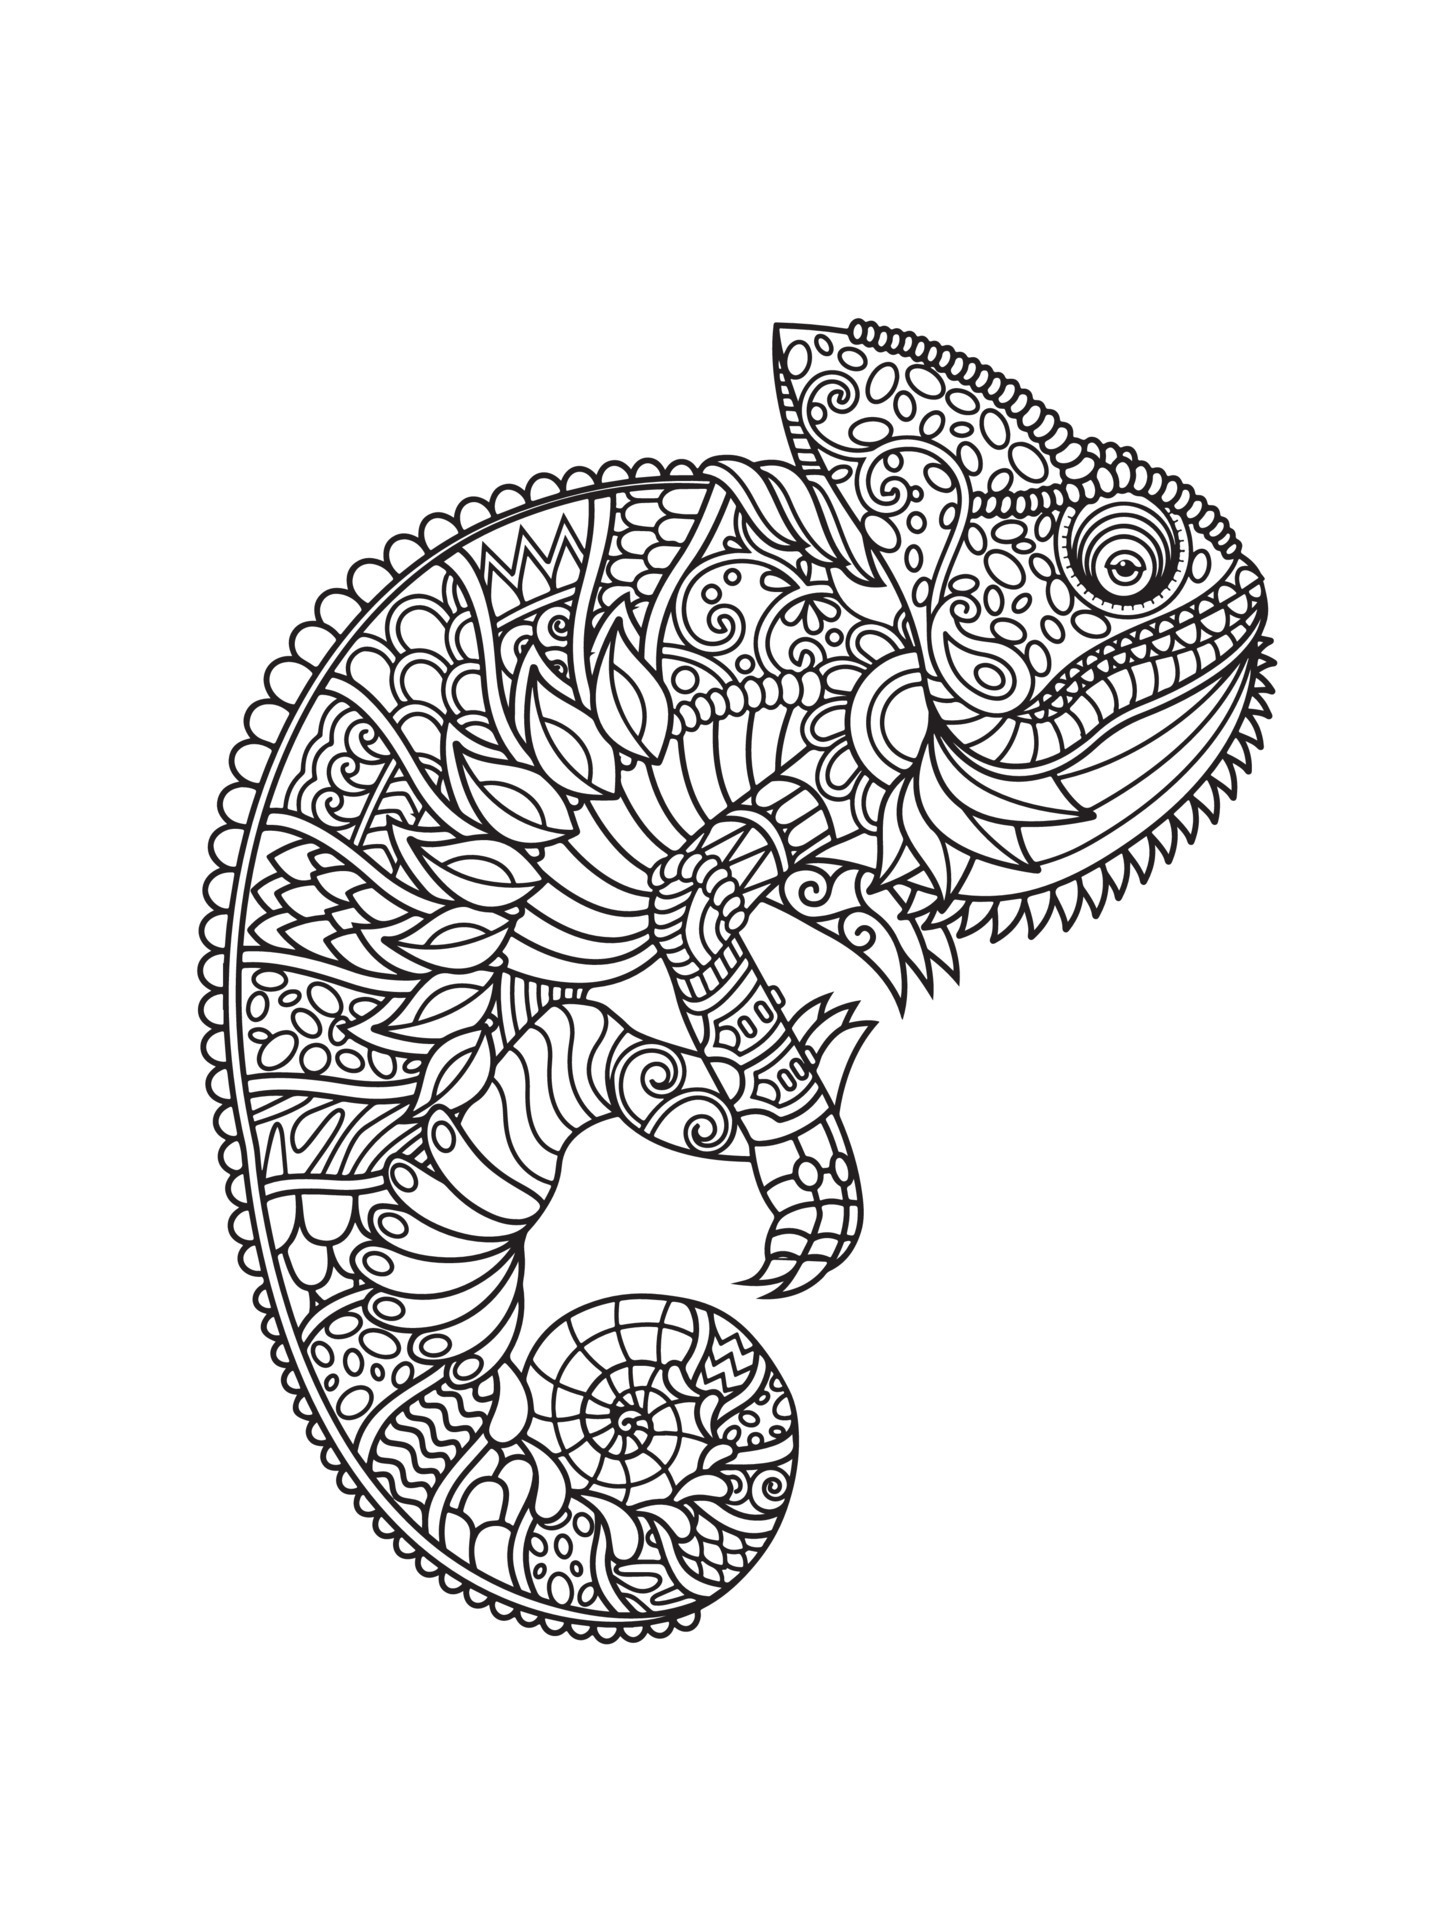 Chameleon Coloring Book for Adults Vector Stock Vector - Illustration of  decor, black: 79389791